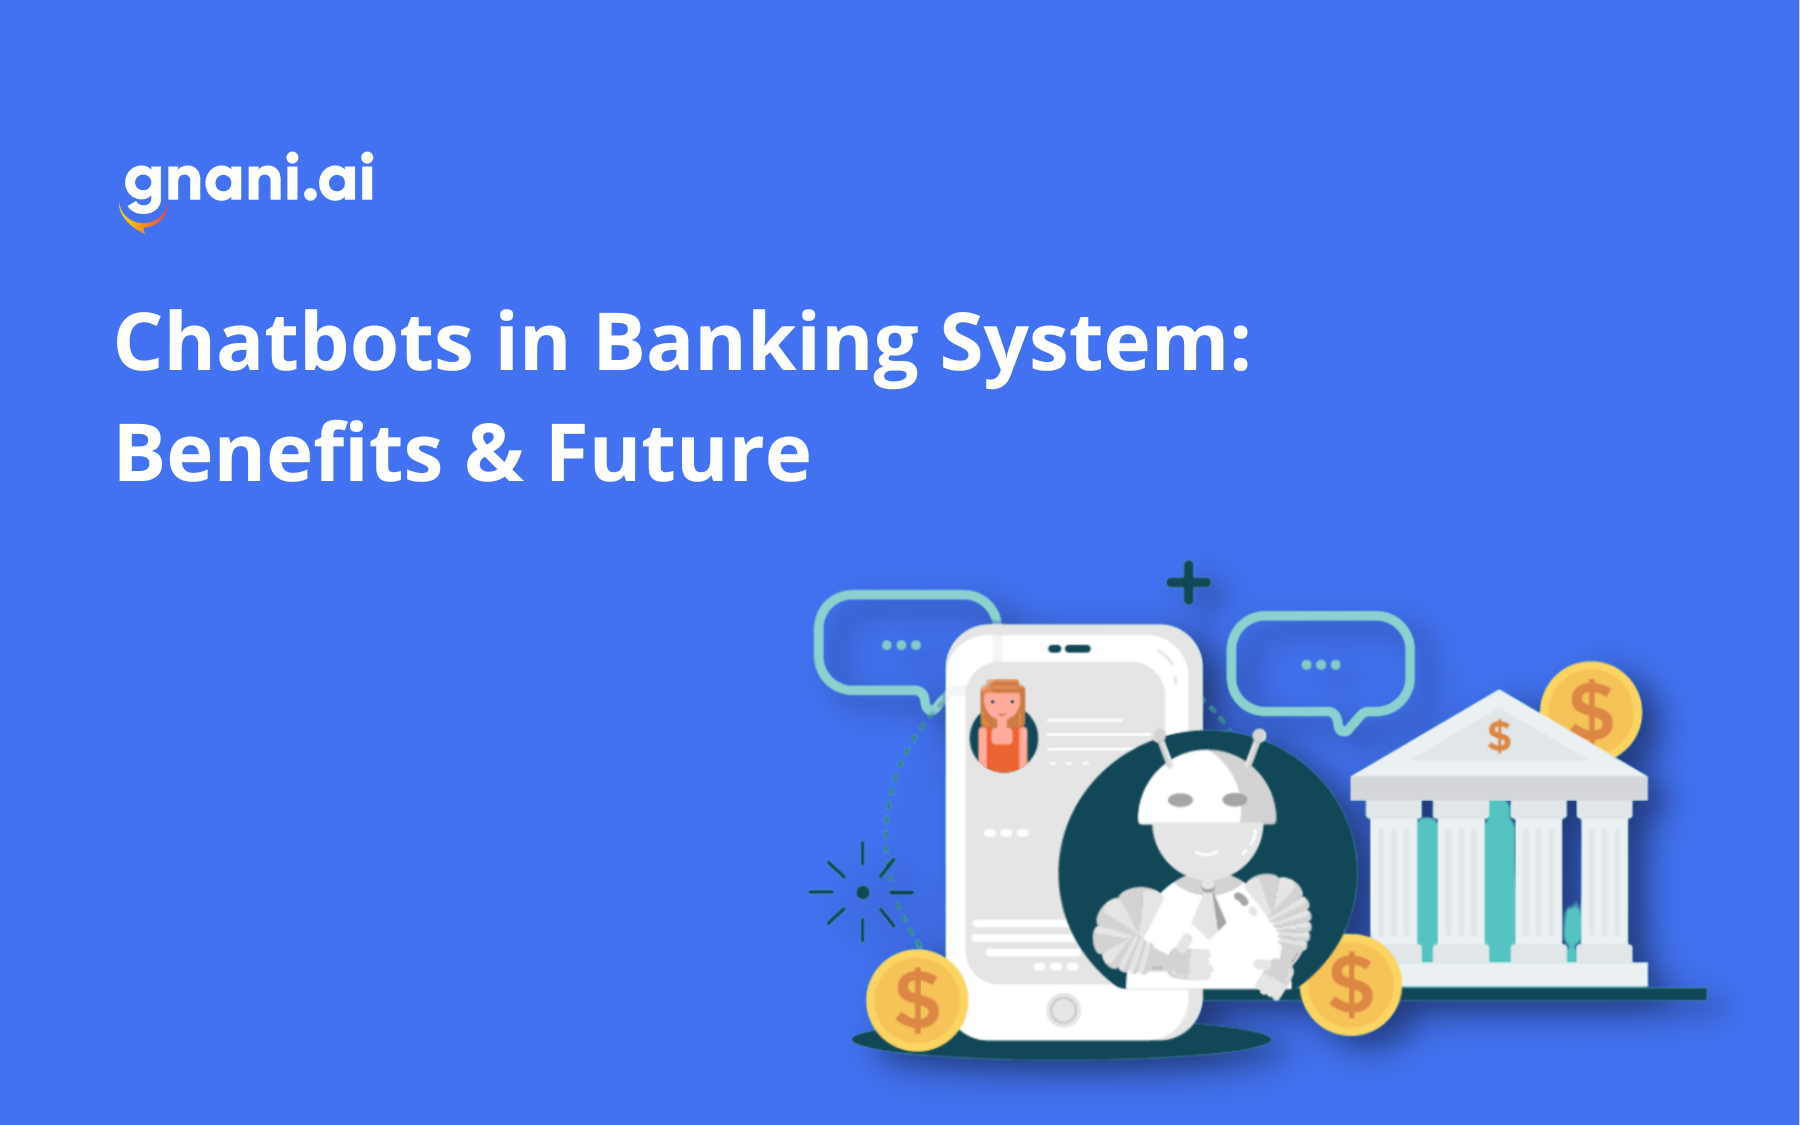 Chatbots in Banking System